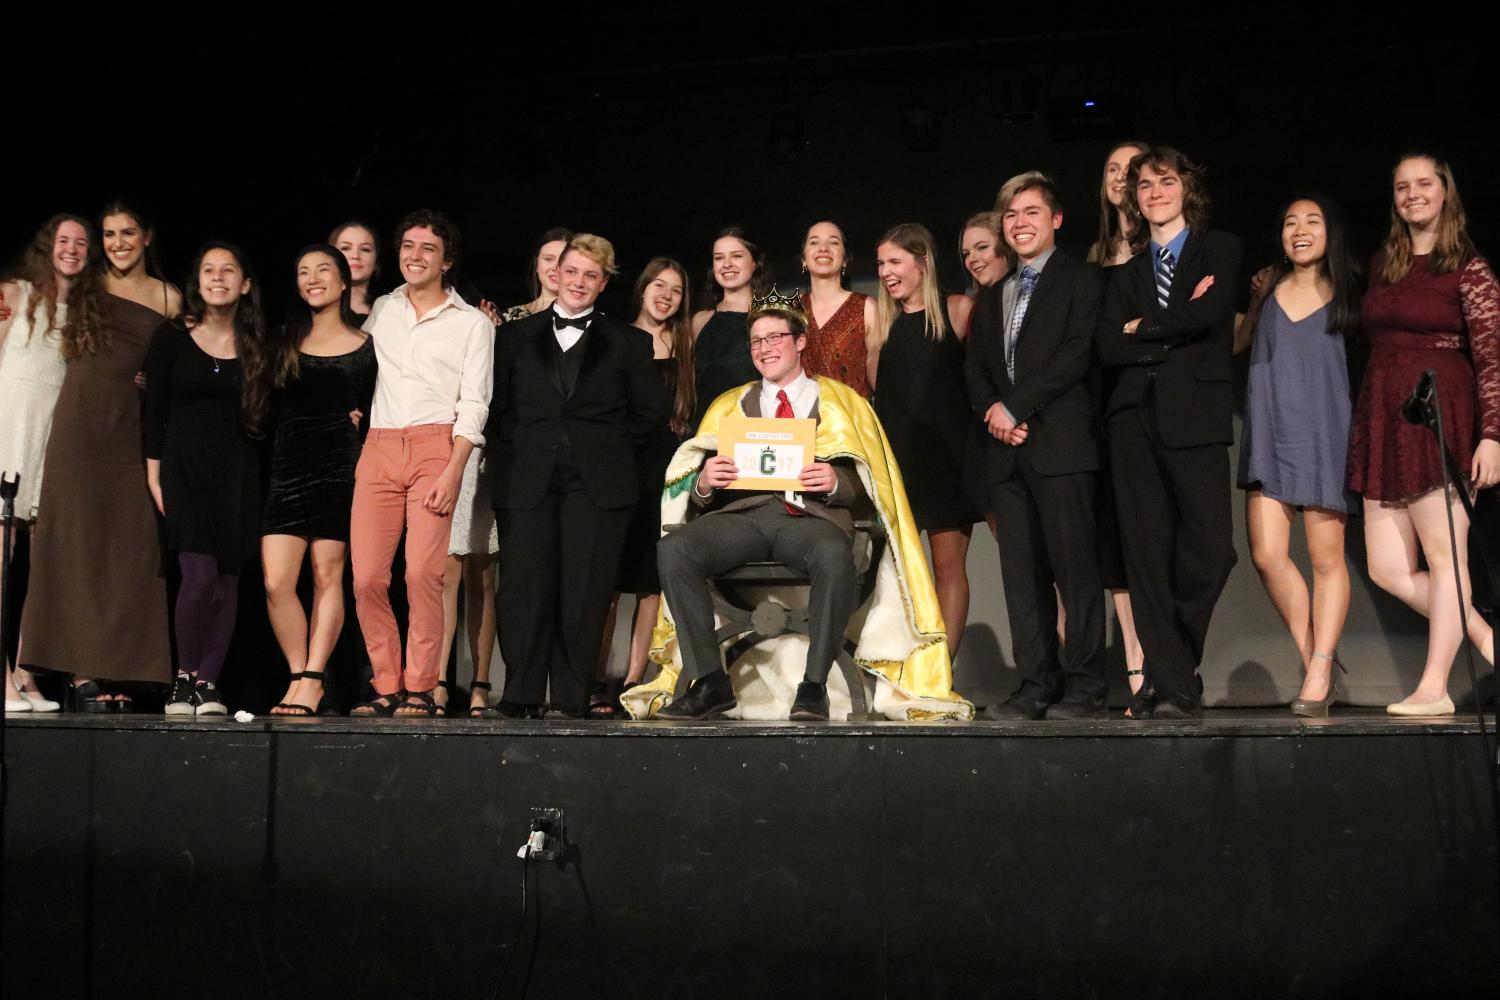 Conor Bergin is Crowned the 2017 Mr. Cleveland